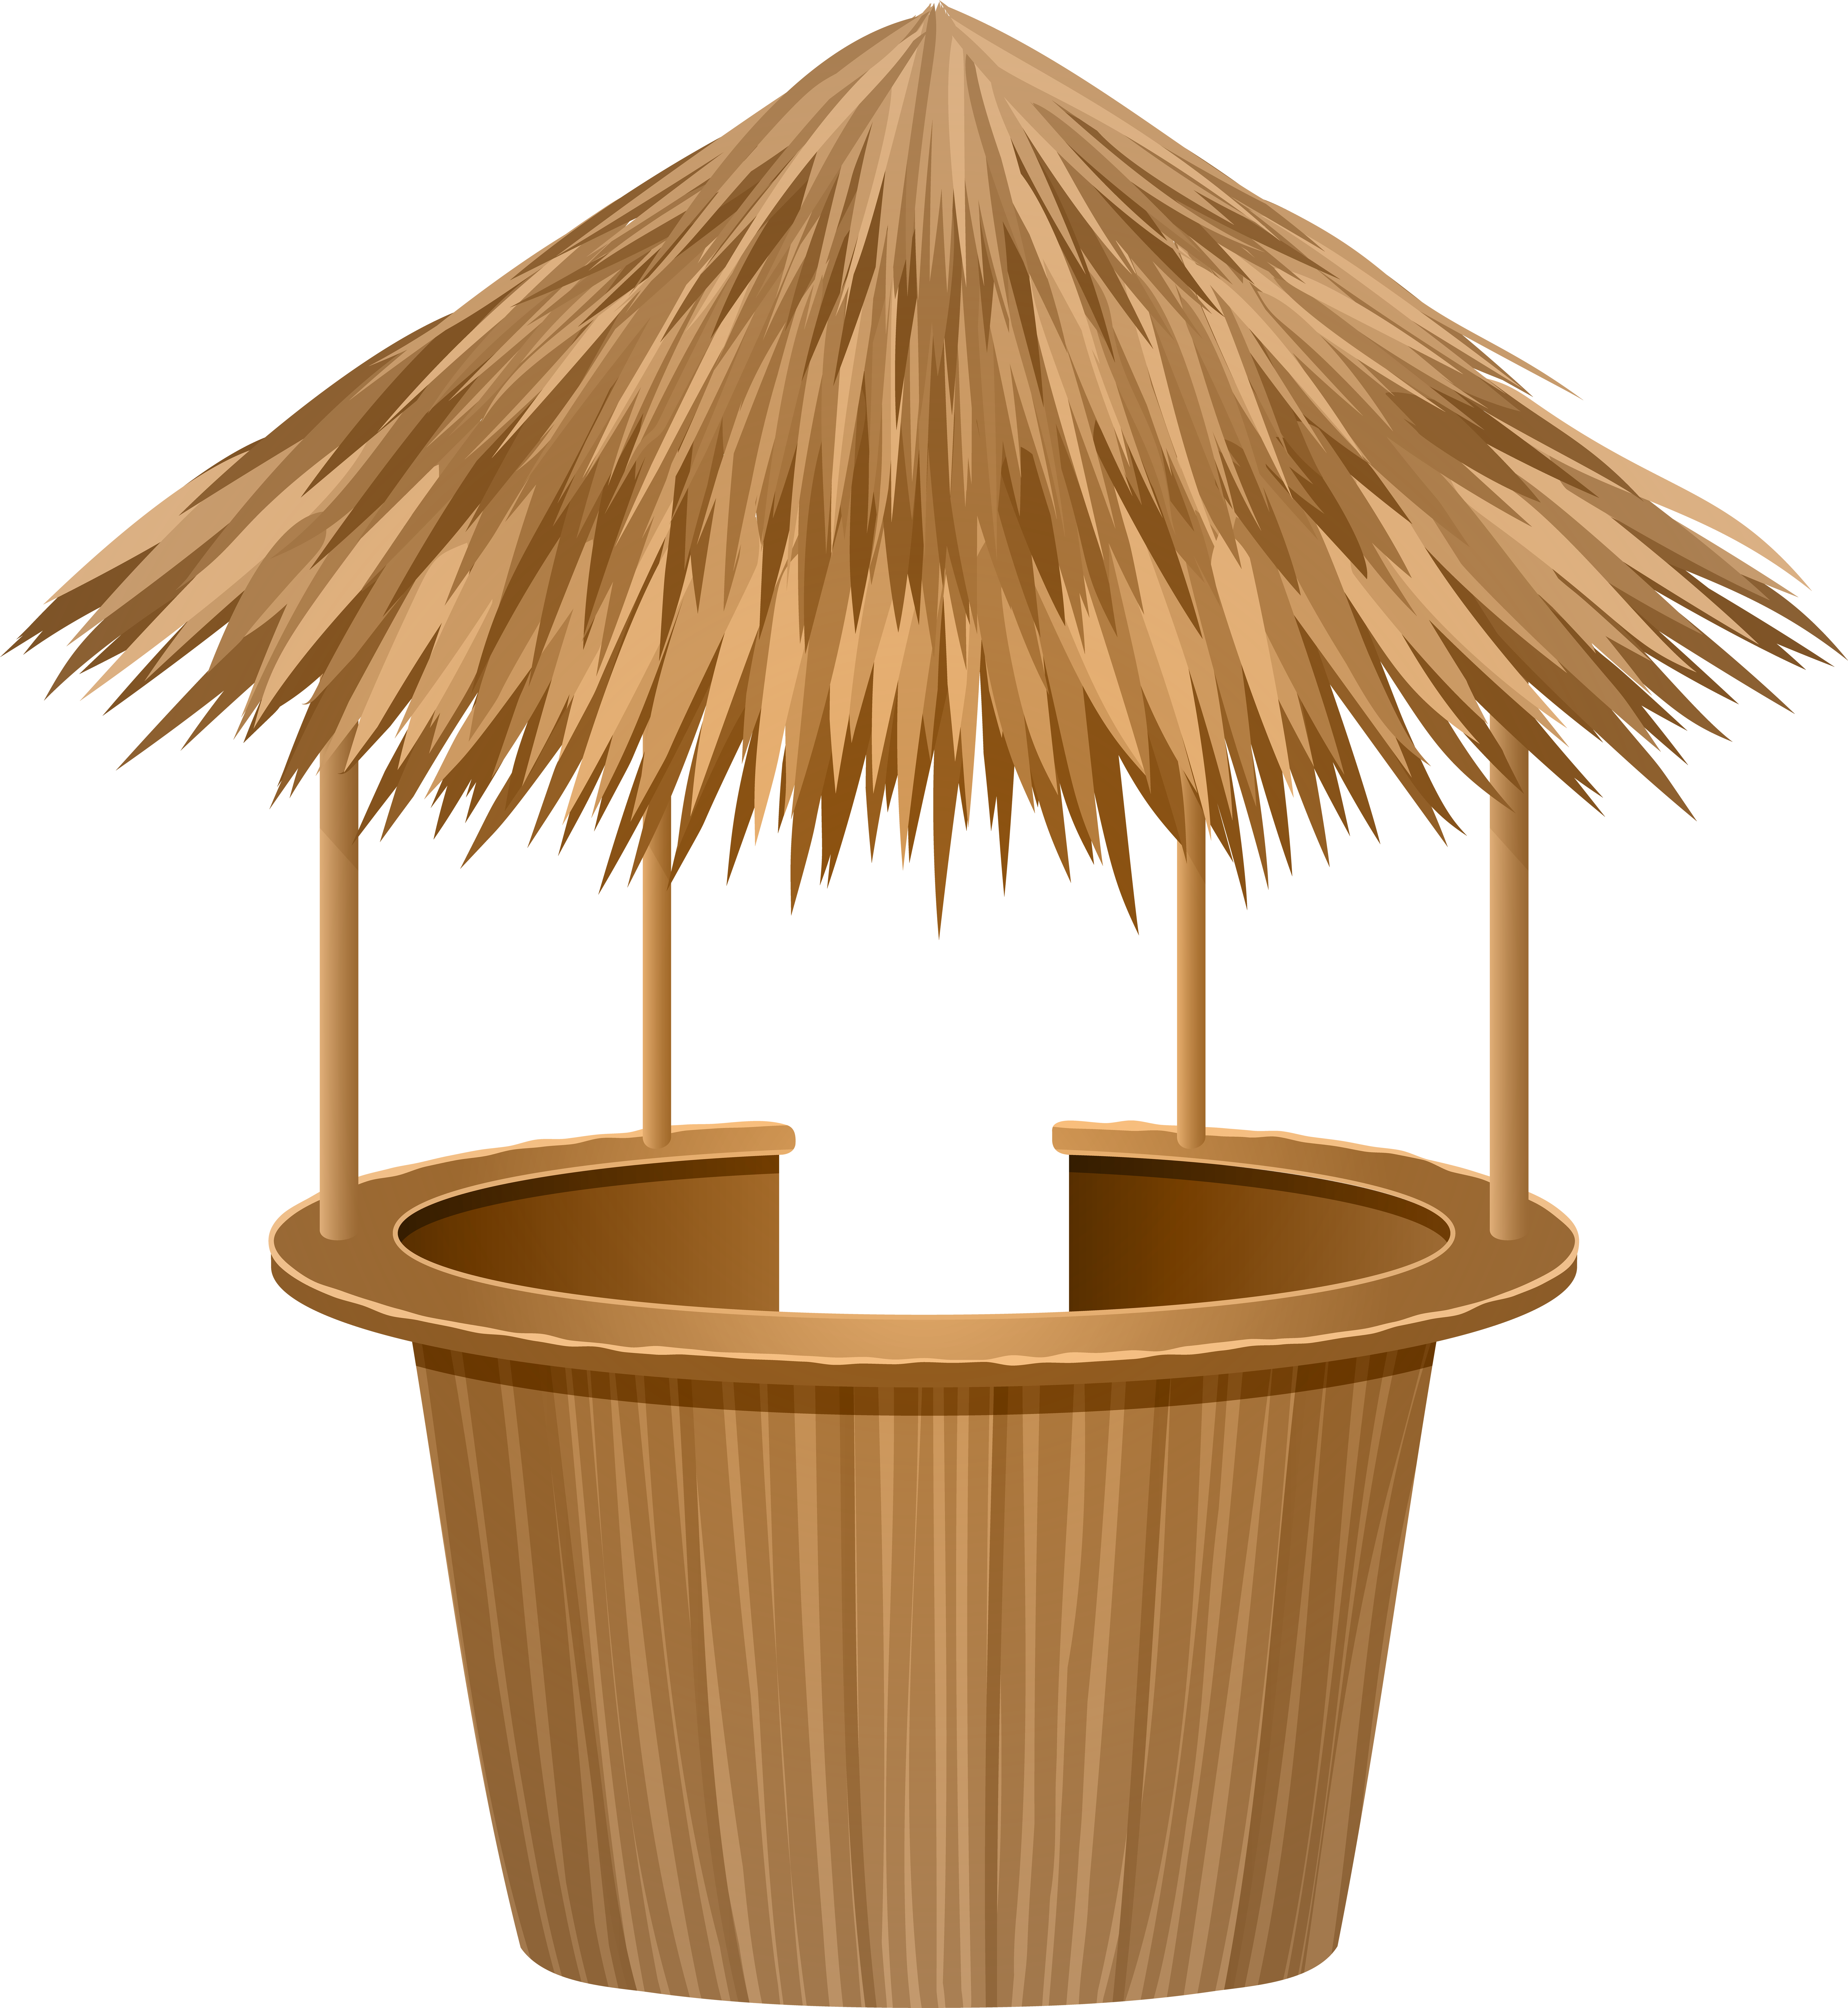 A Straw Hut With A Straw Roof